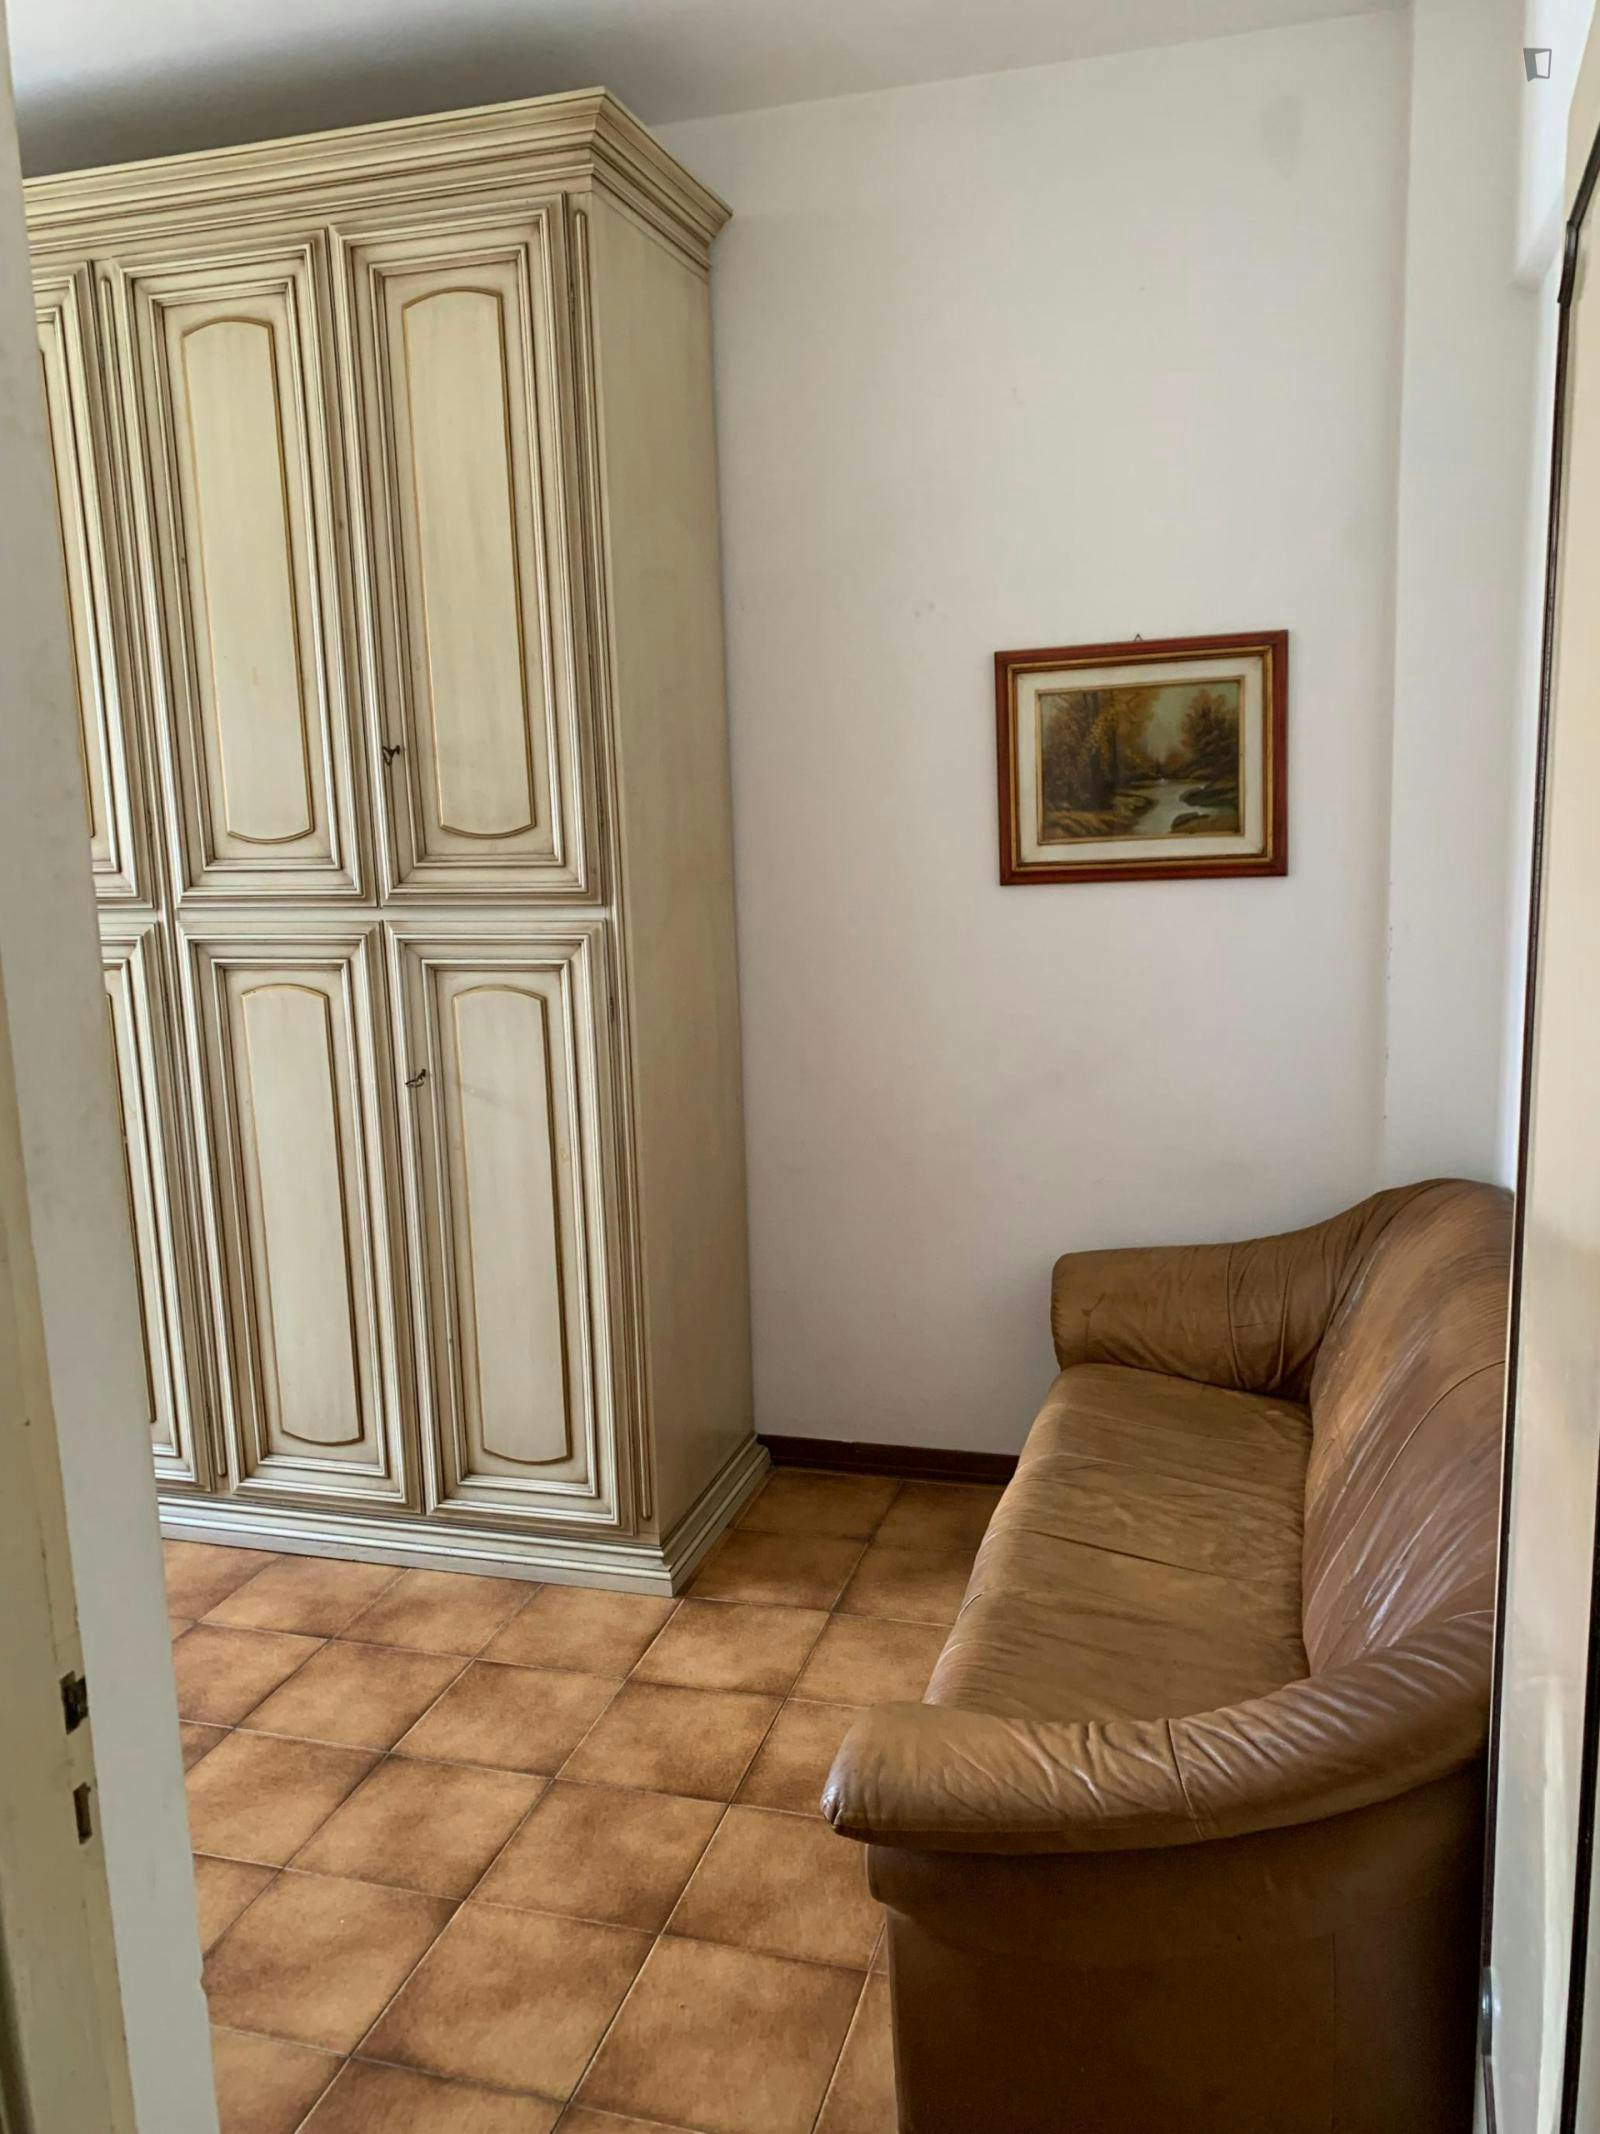 Homely single bedroom near the centre of Pisa